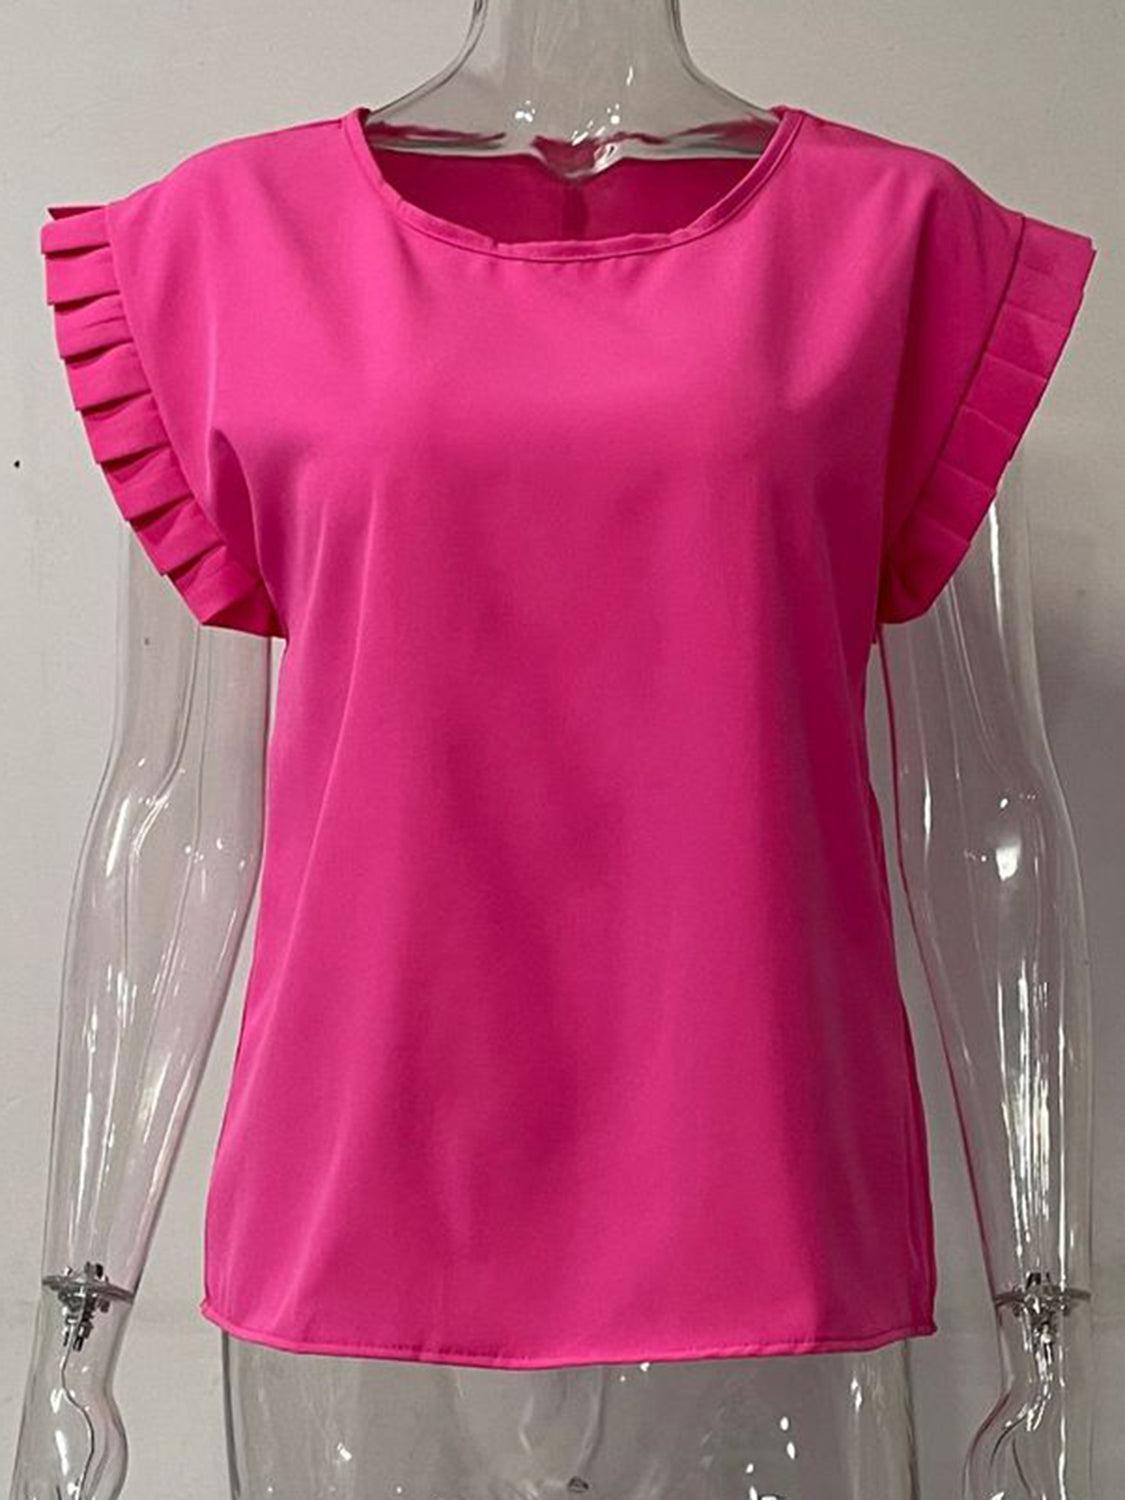 a mannequin wearing a pink top with ruffles